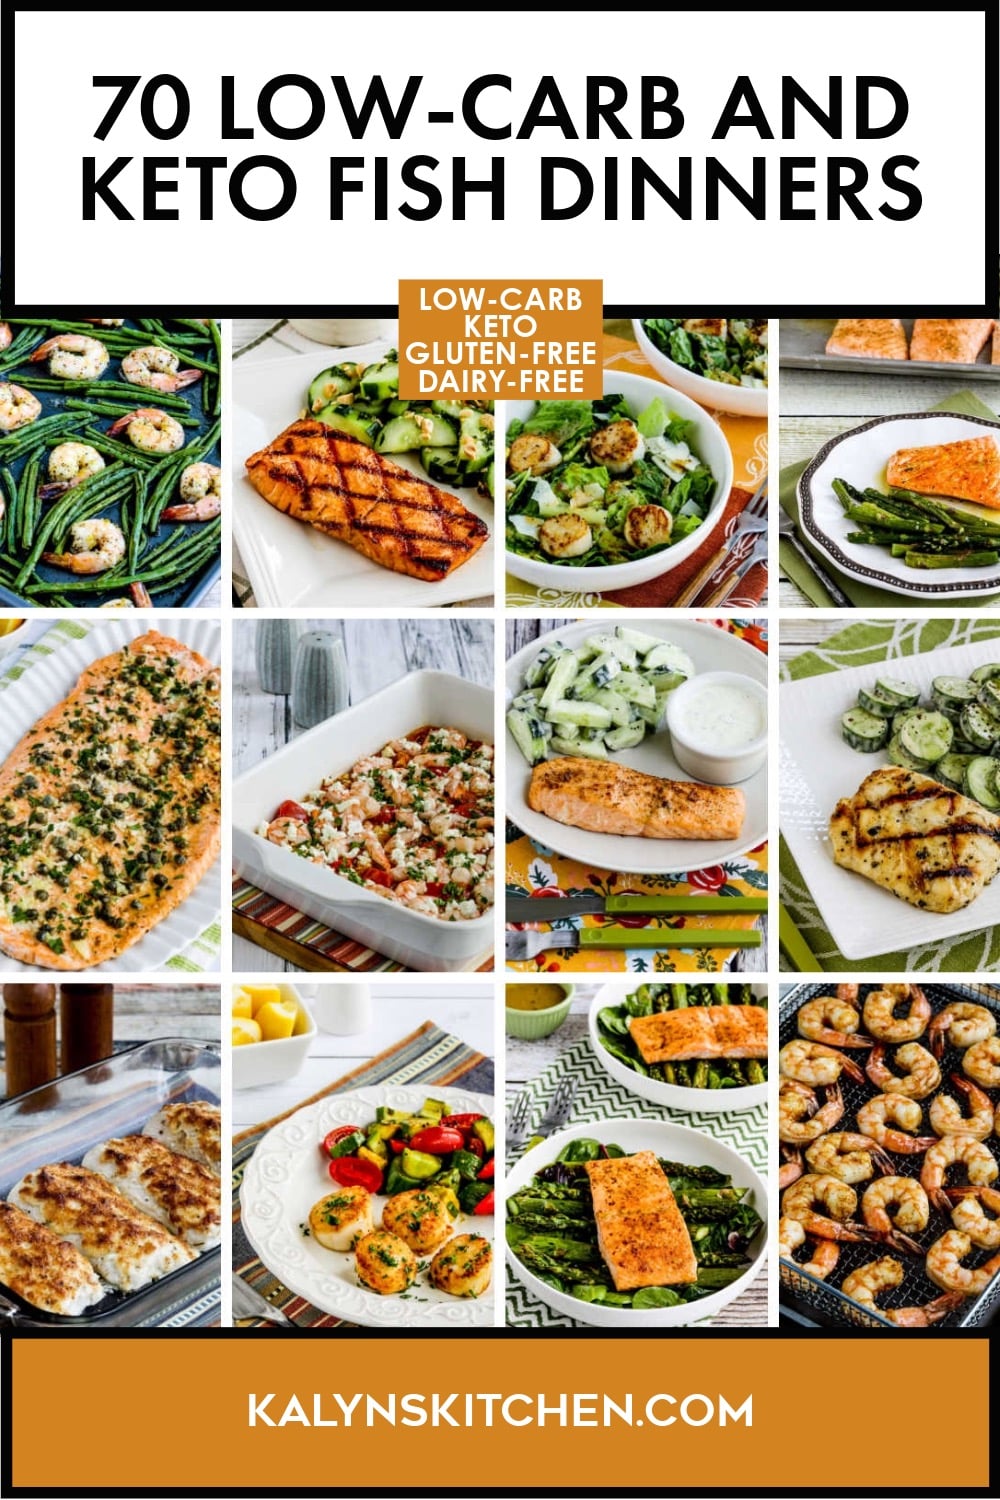 Pinterest image of 70 Low-Carb and Keto Fish Dinners